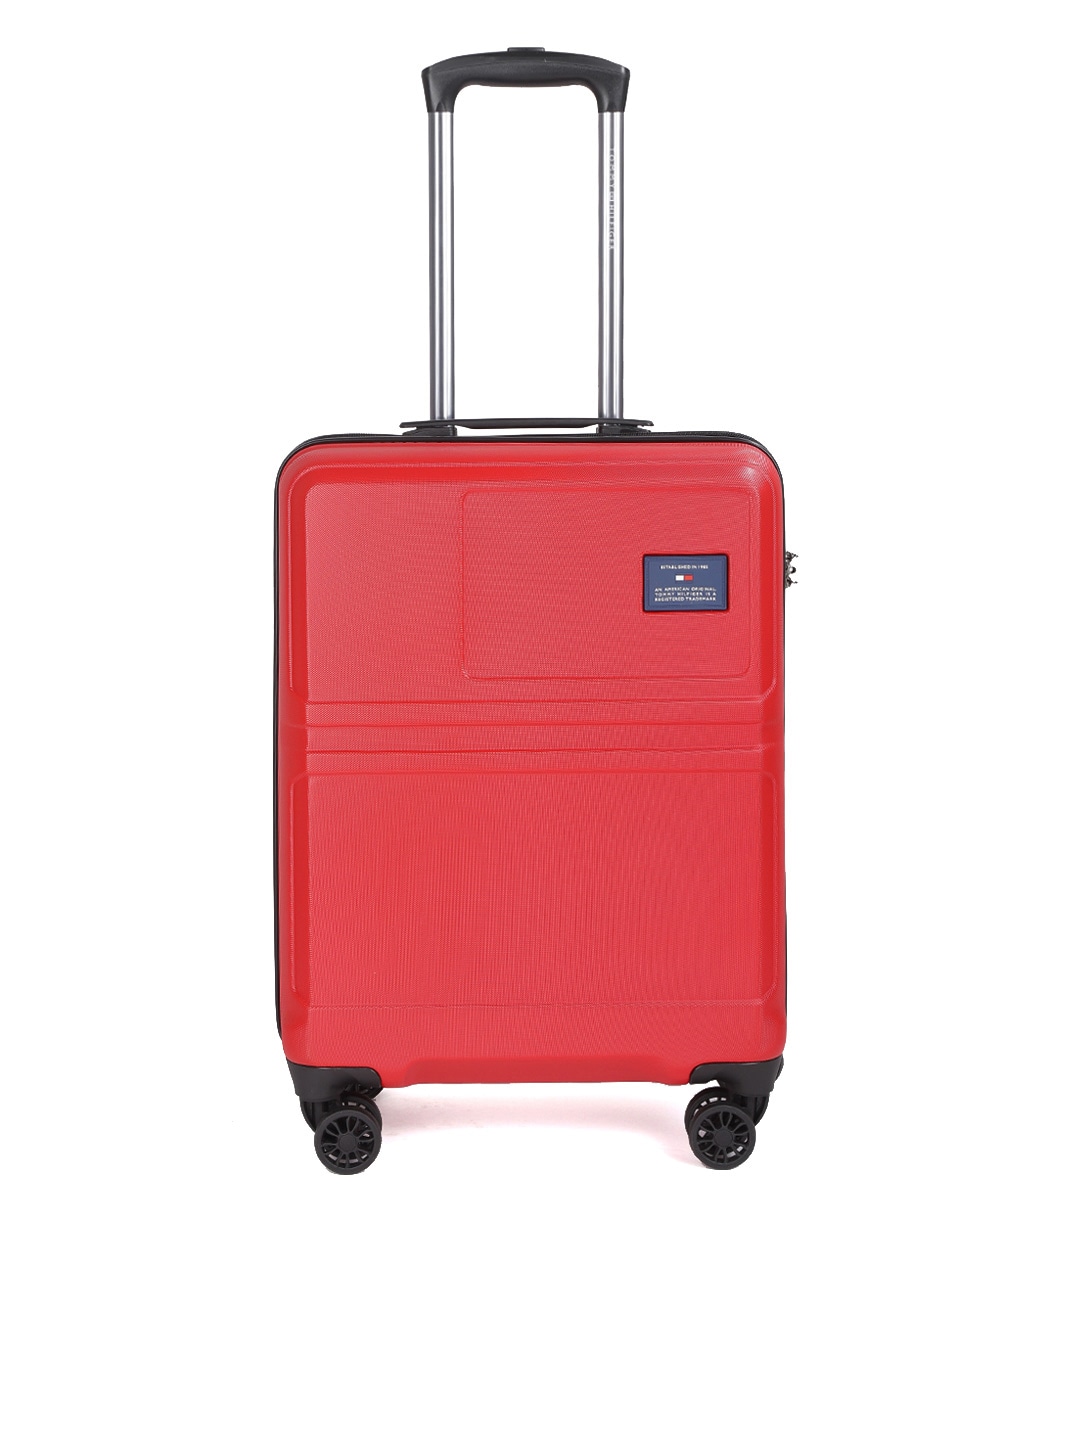 Tommy Hilfiger Unisex Red Hard Luggage 4-Wheel 360-Degree Rotation Cabin Trolley Suitcase Price in India